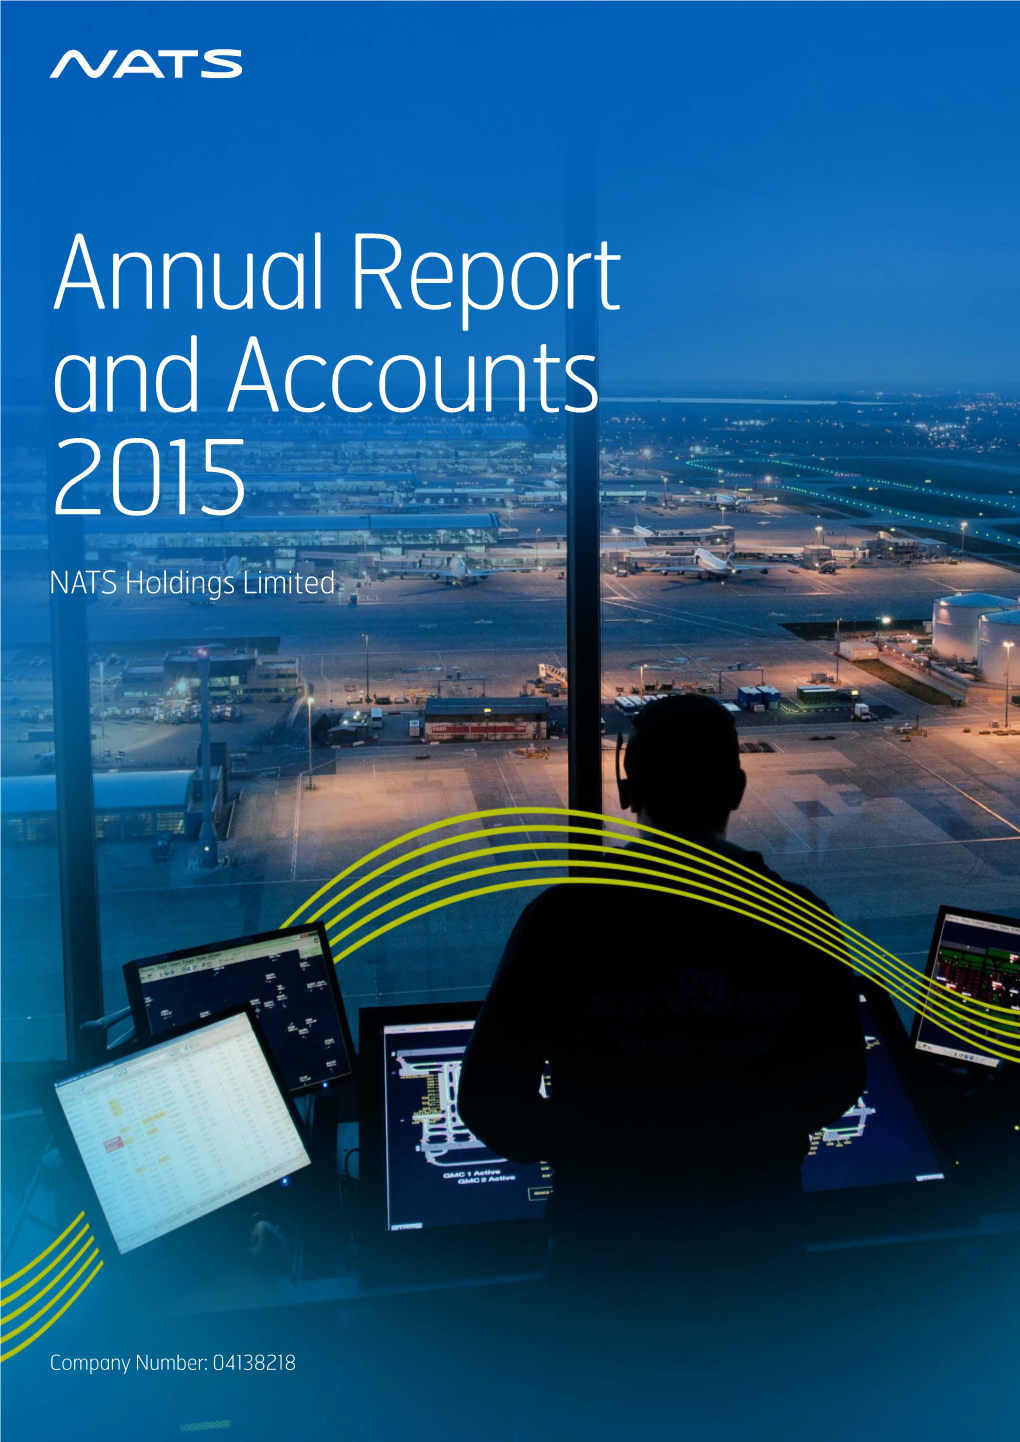 Annual Report and Accounts 2015